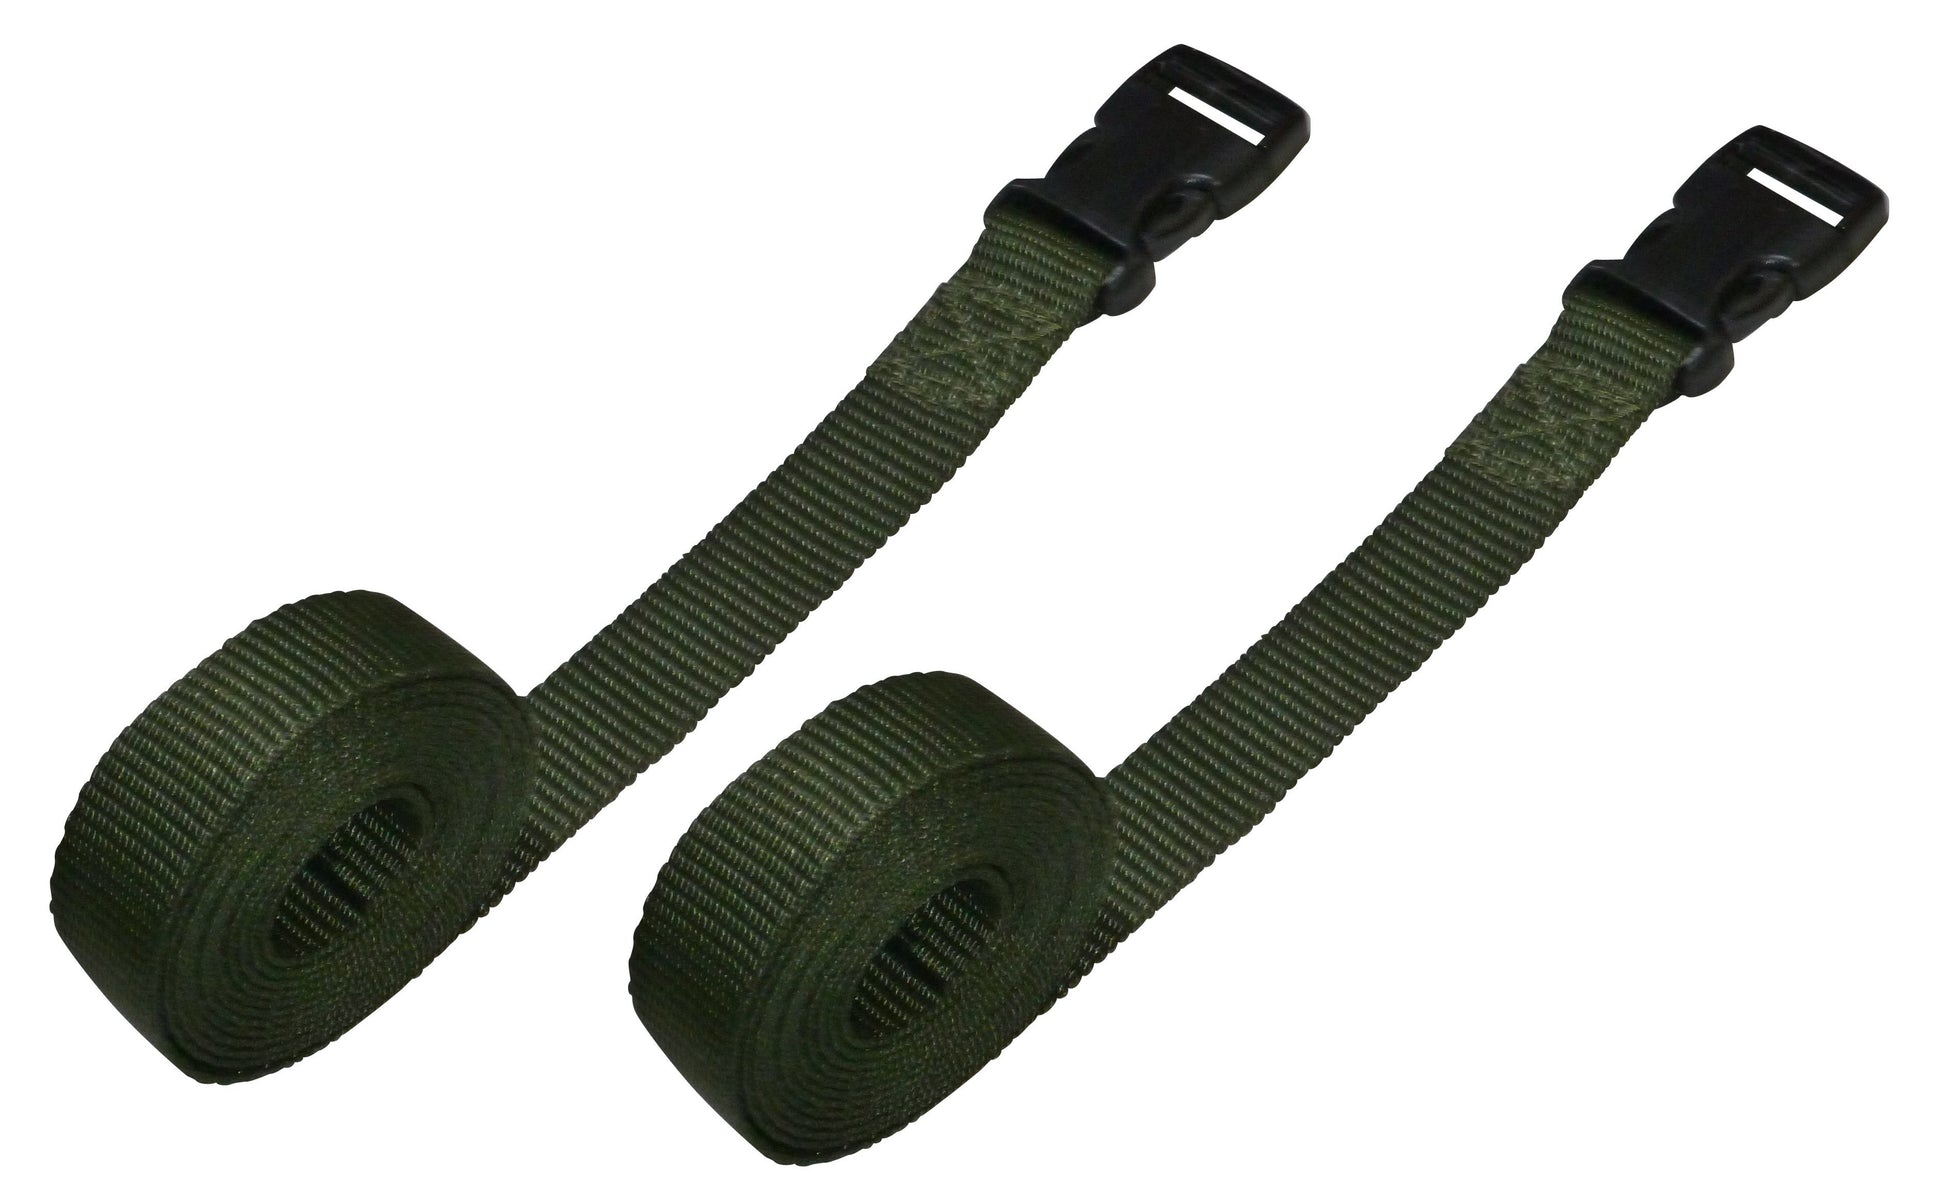 Benristraps 25mm Webbing Strap with Quick Release Buckle (Pair) in olive green